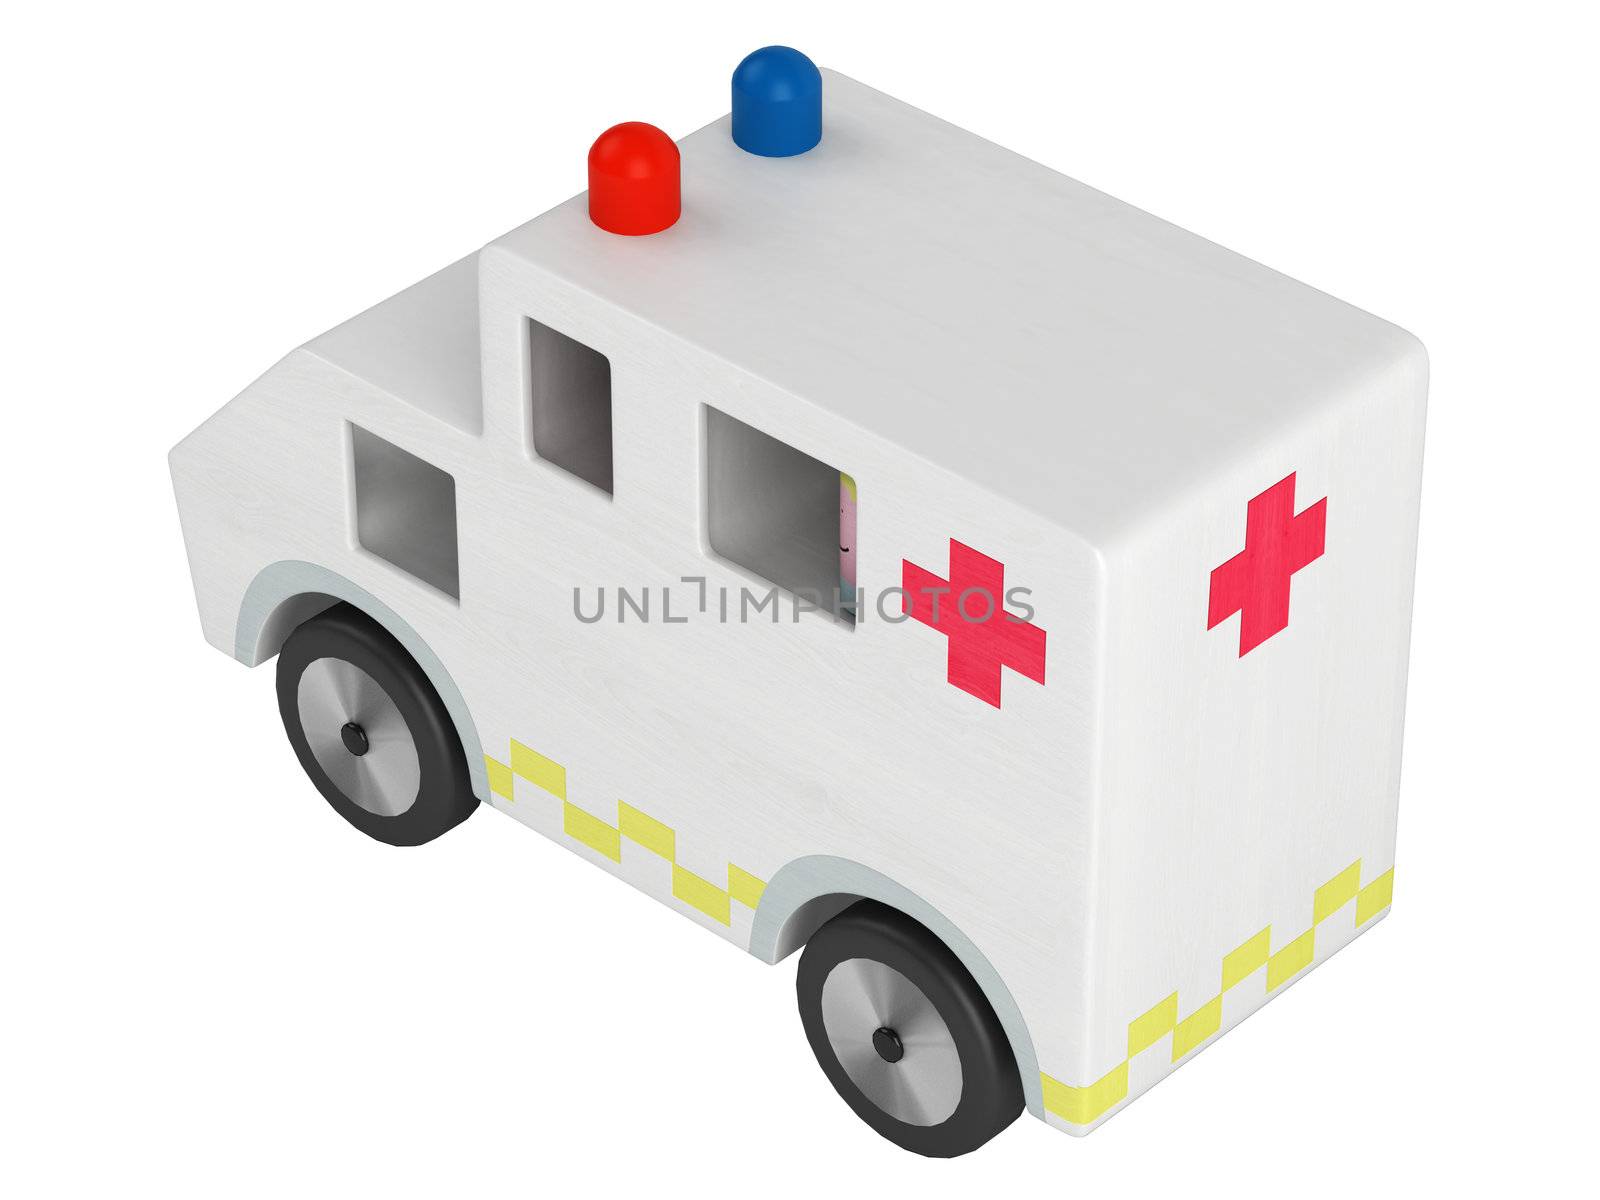 Simple stylised wooden toy ambulance with a red cross, emergency lights and paramedics or patients in the rear isolated on a white background